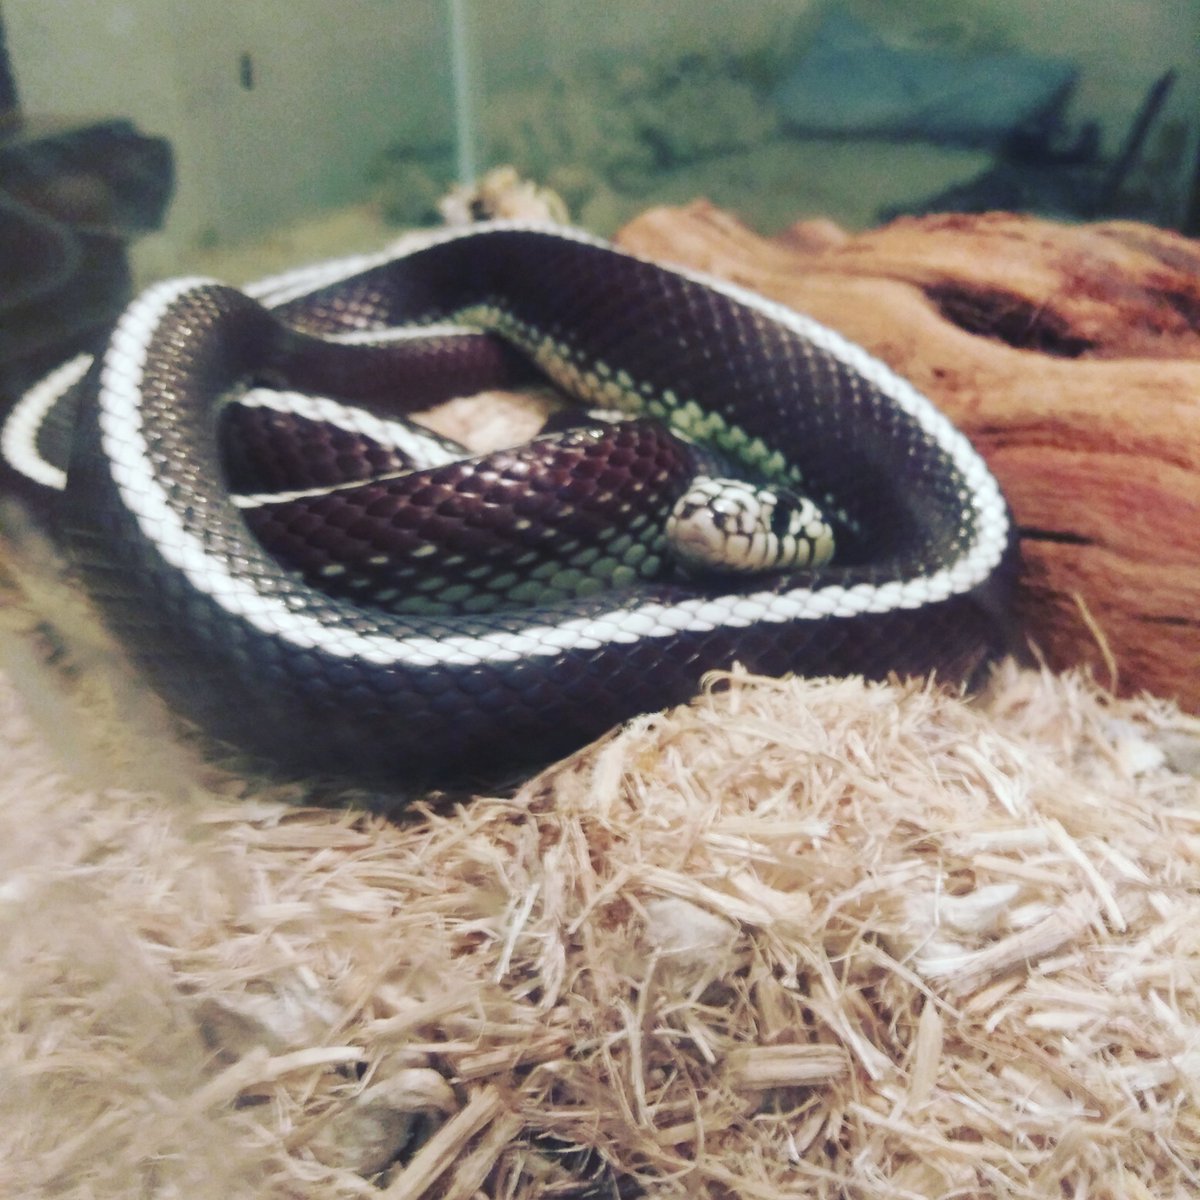 A rare time to be able to take a pic of my precious noodle Flower. She's my Cali kingsnake going on about 6 years old now. She's truely a sweetheart with handling and nature in general X3. #snakes #noodles #scalypets